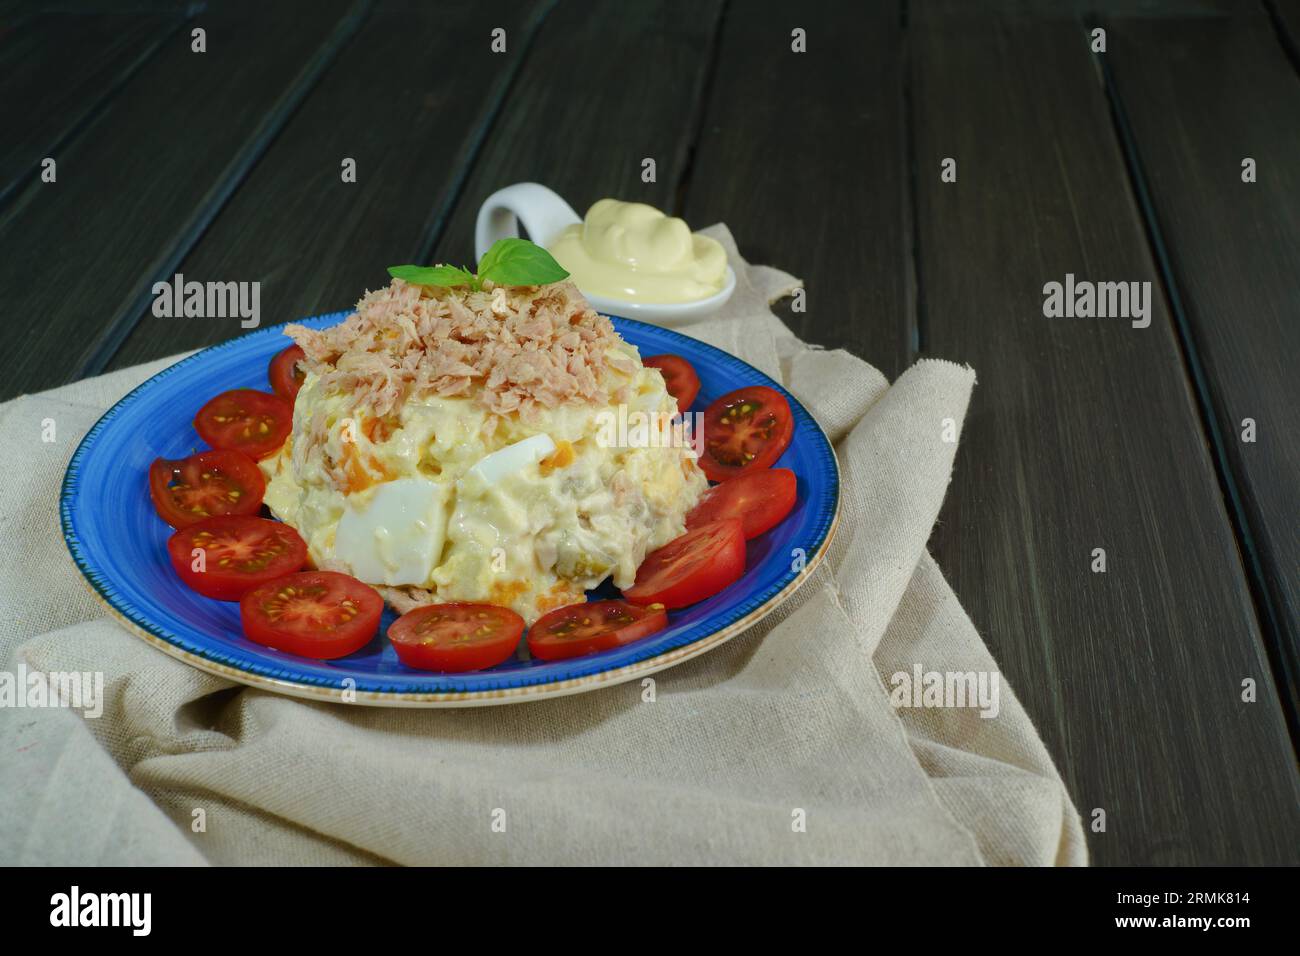 Ensaladilla rusa or russian salad, typical spanish tapa with tuna and mayonnaise on a blue plate decorated with tomato and green leaves on a raffia Stock Photo